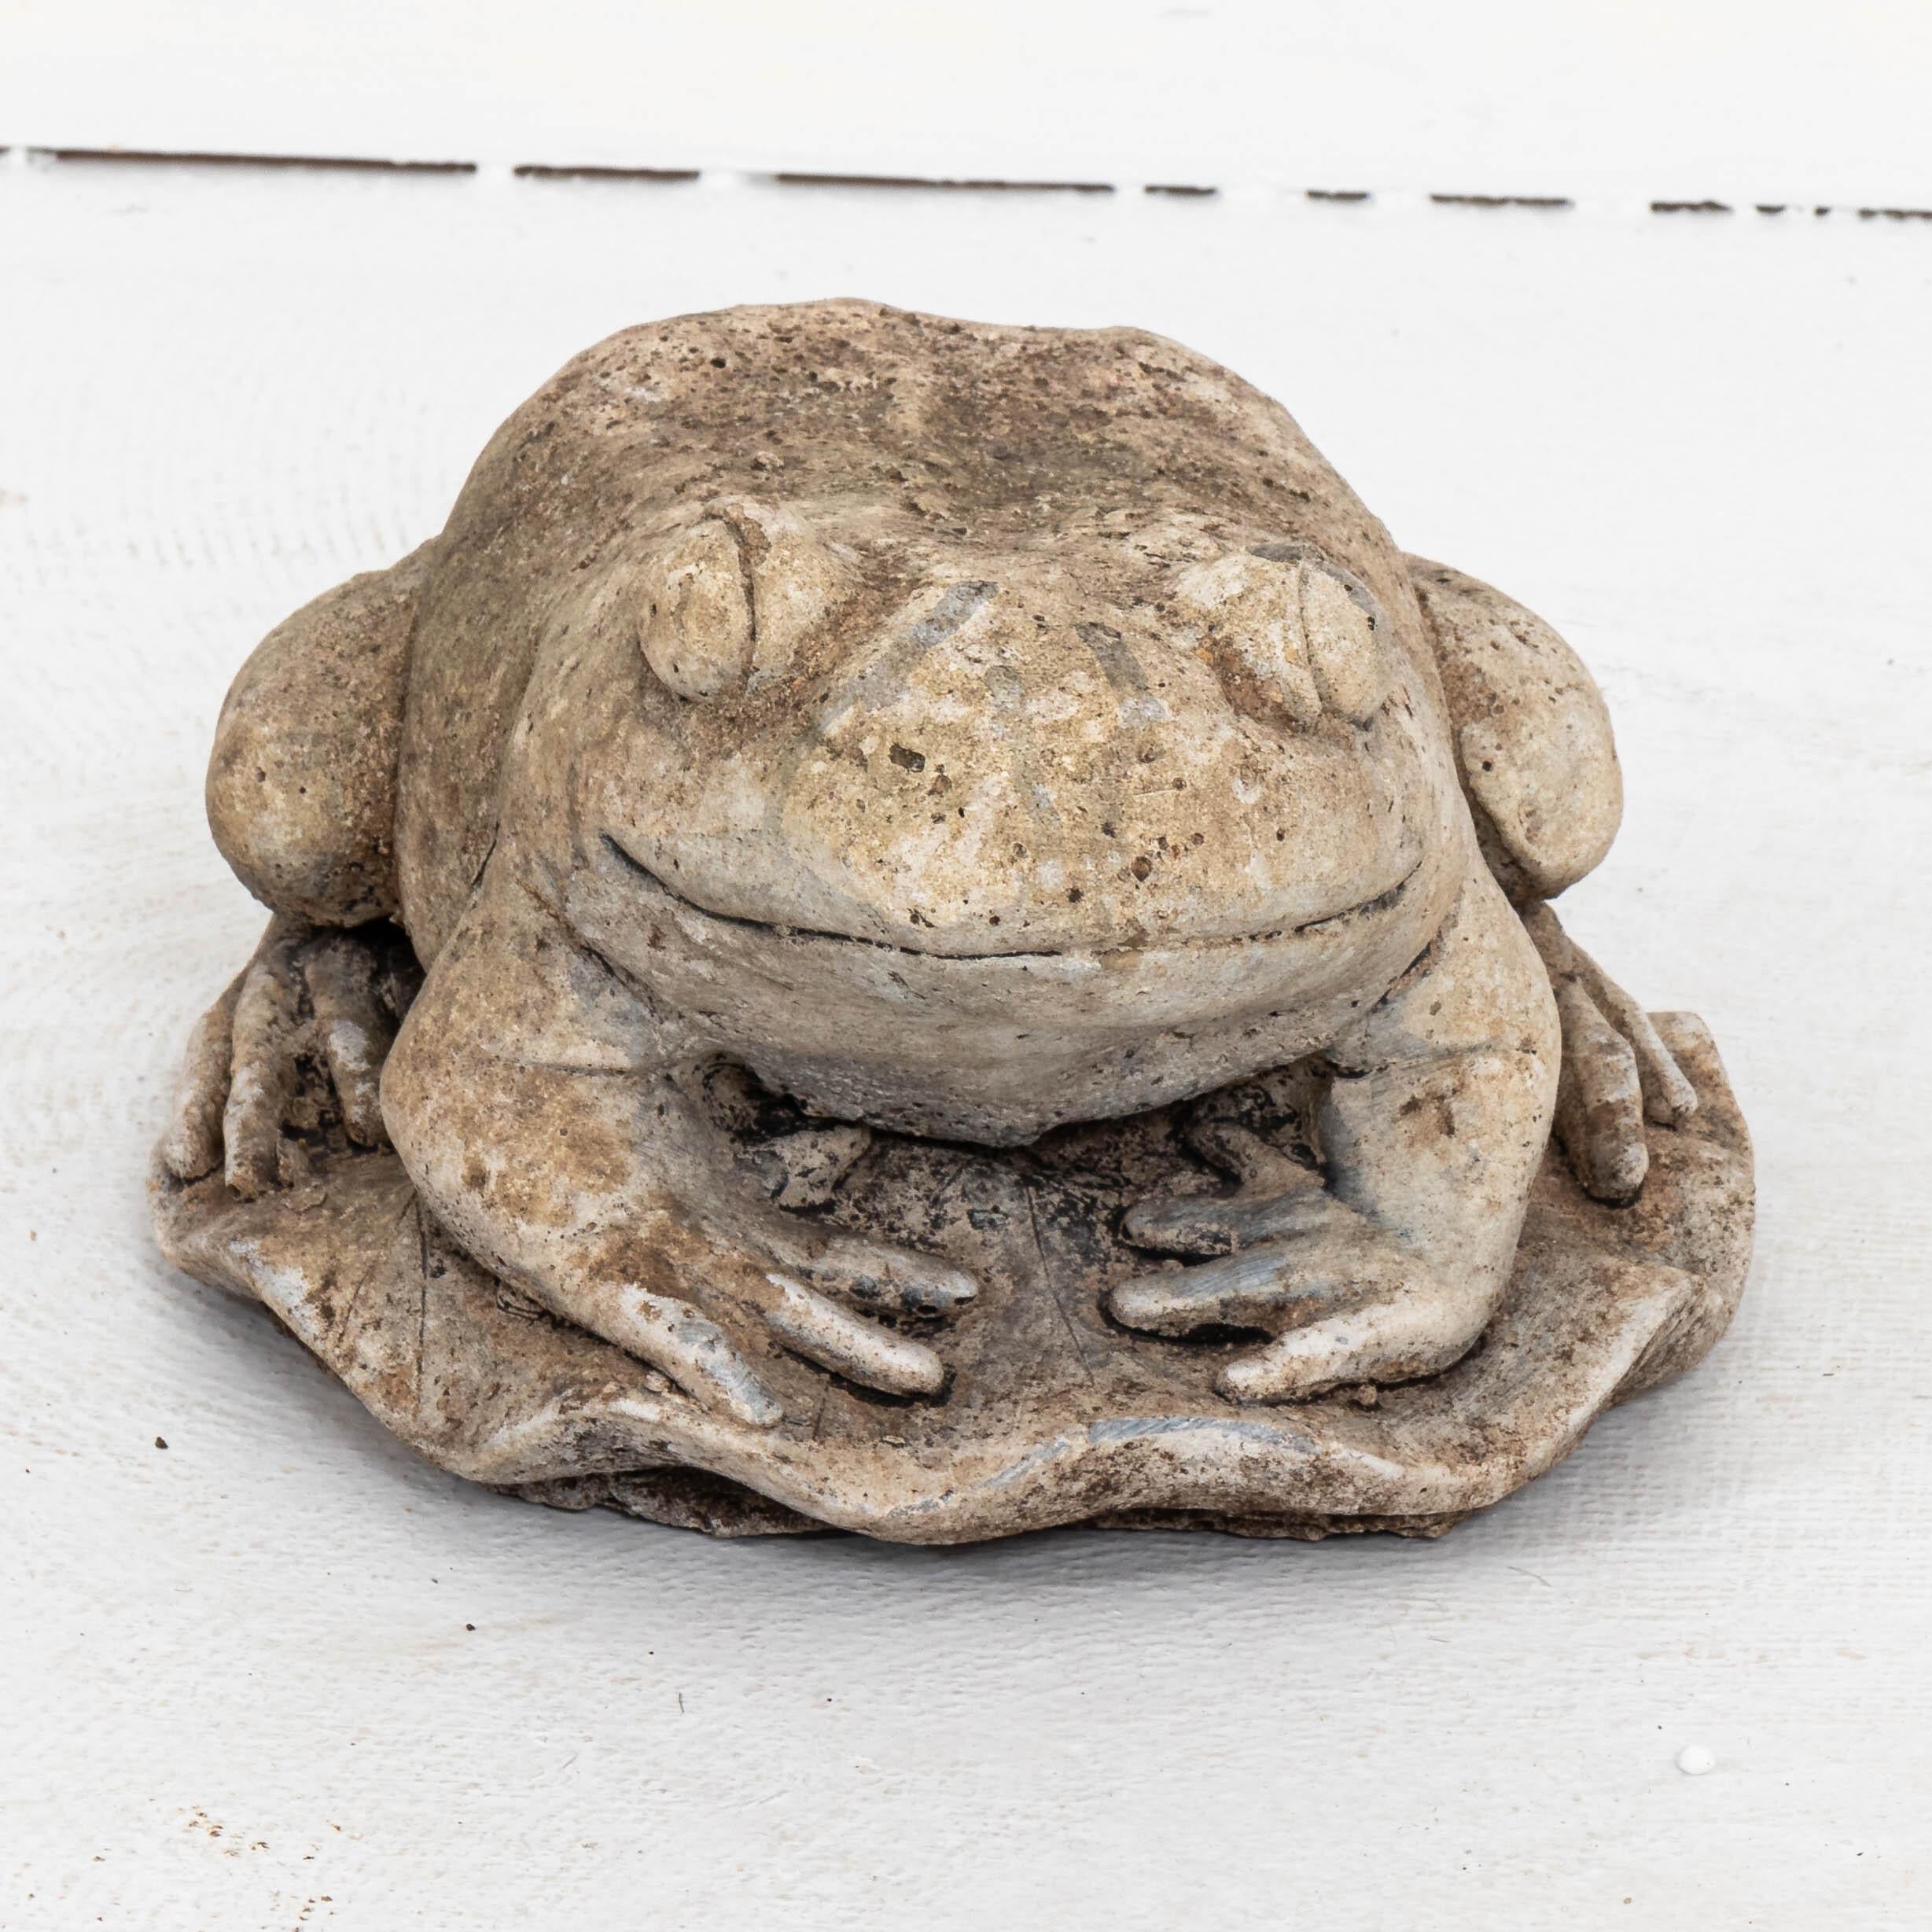 Unique cast stone garden statue in the shape of frog crouching on a leaf. Made in England in the early 20th century, this charming statue a playful element to add to the landscape. Good condition, weathered with age and exposure to the elements.